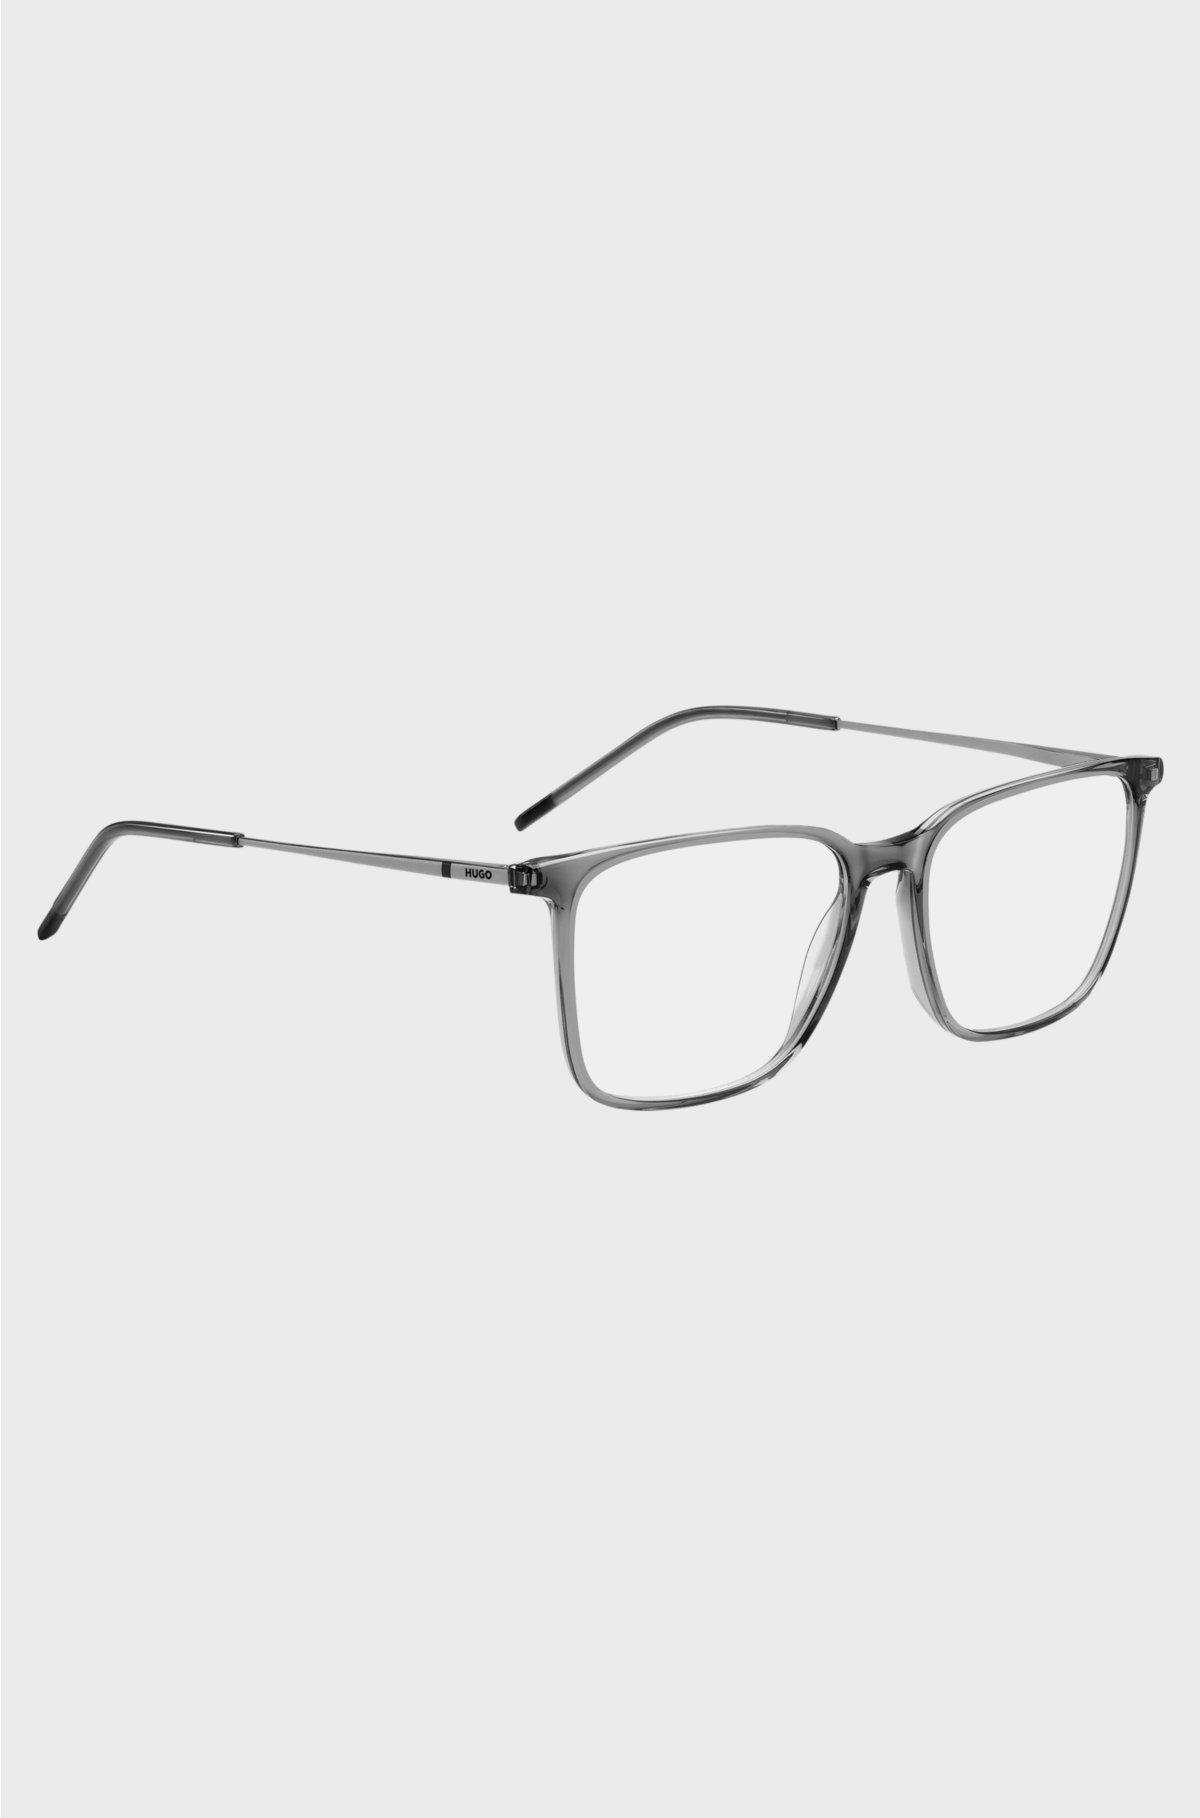 Optical frames in transparent grey acetate with metal temples, Grey